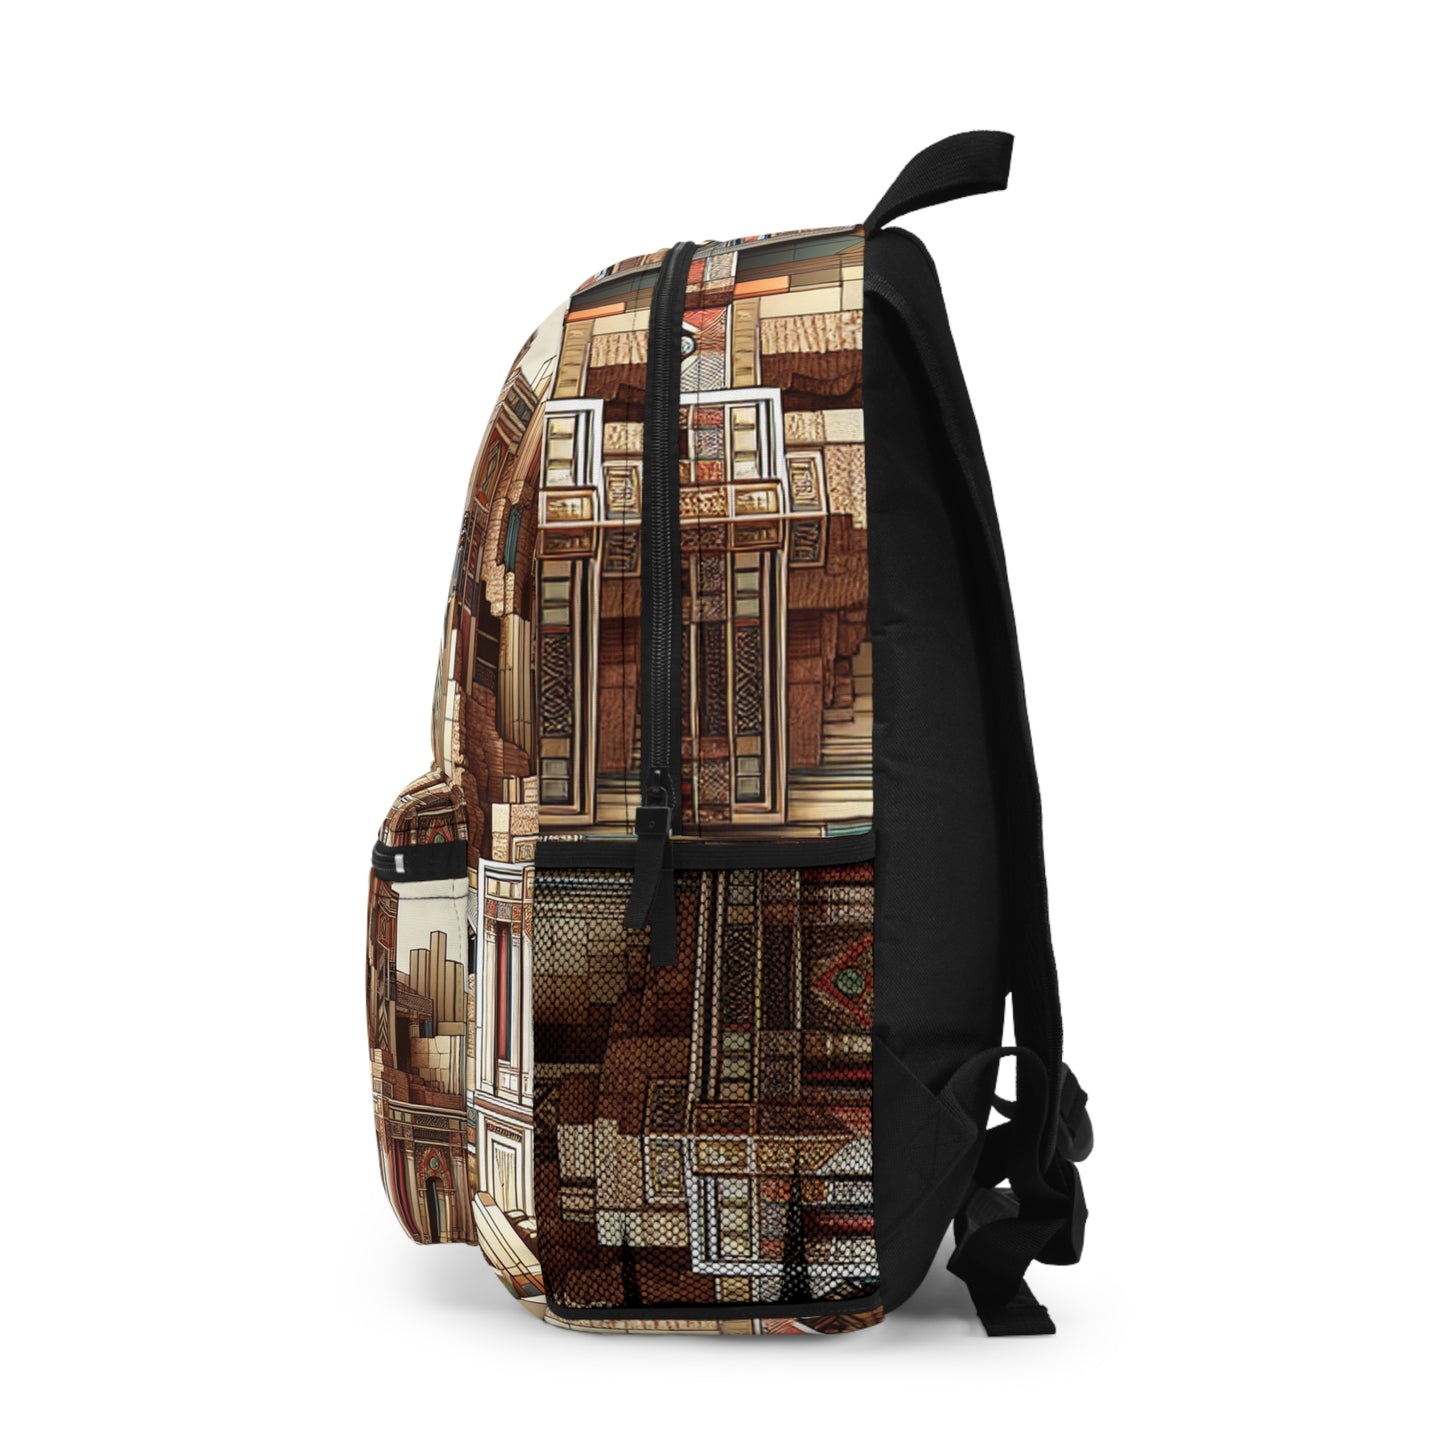 "Deco Ruins: Geometric Art in an Ancient Setting" - The Alien Backpack Art Deco Style